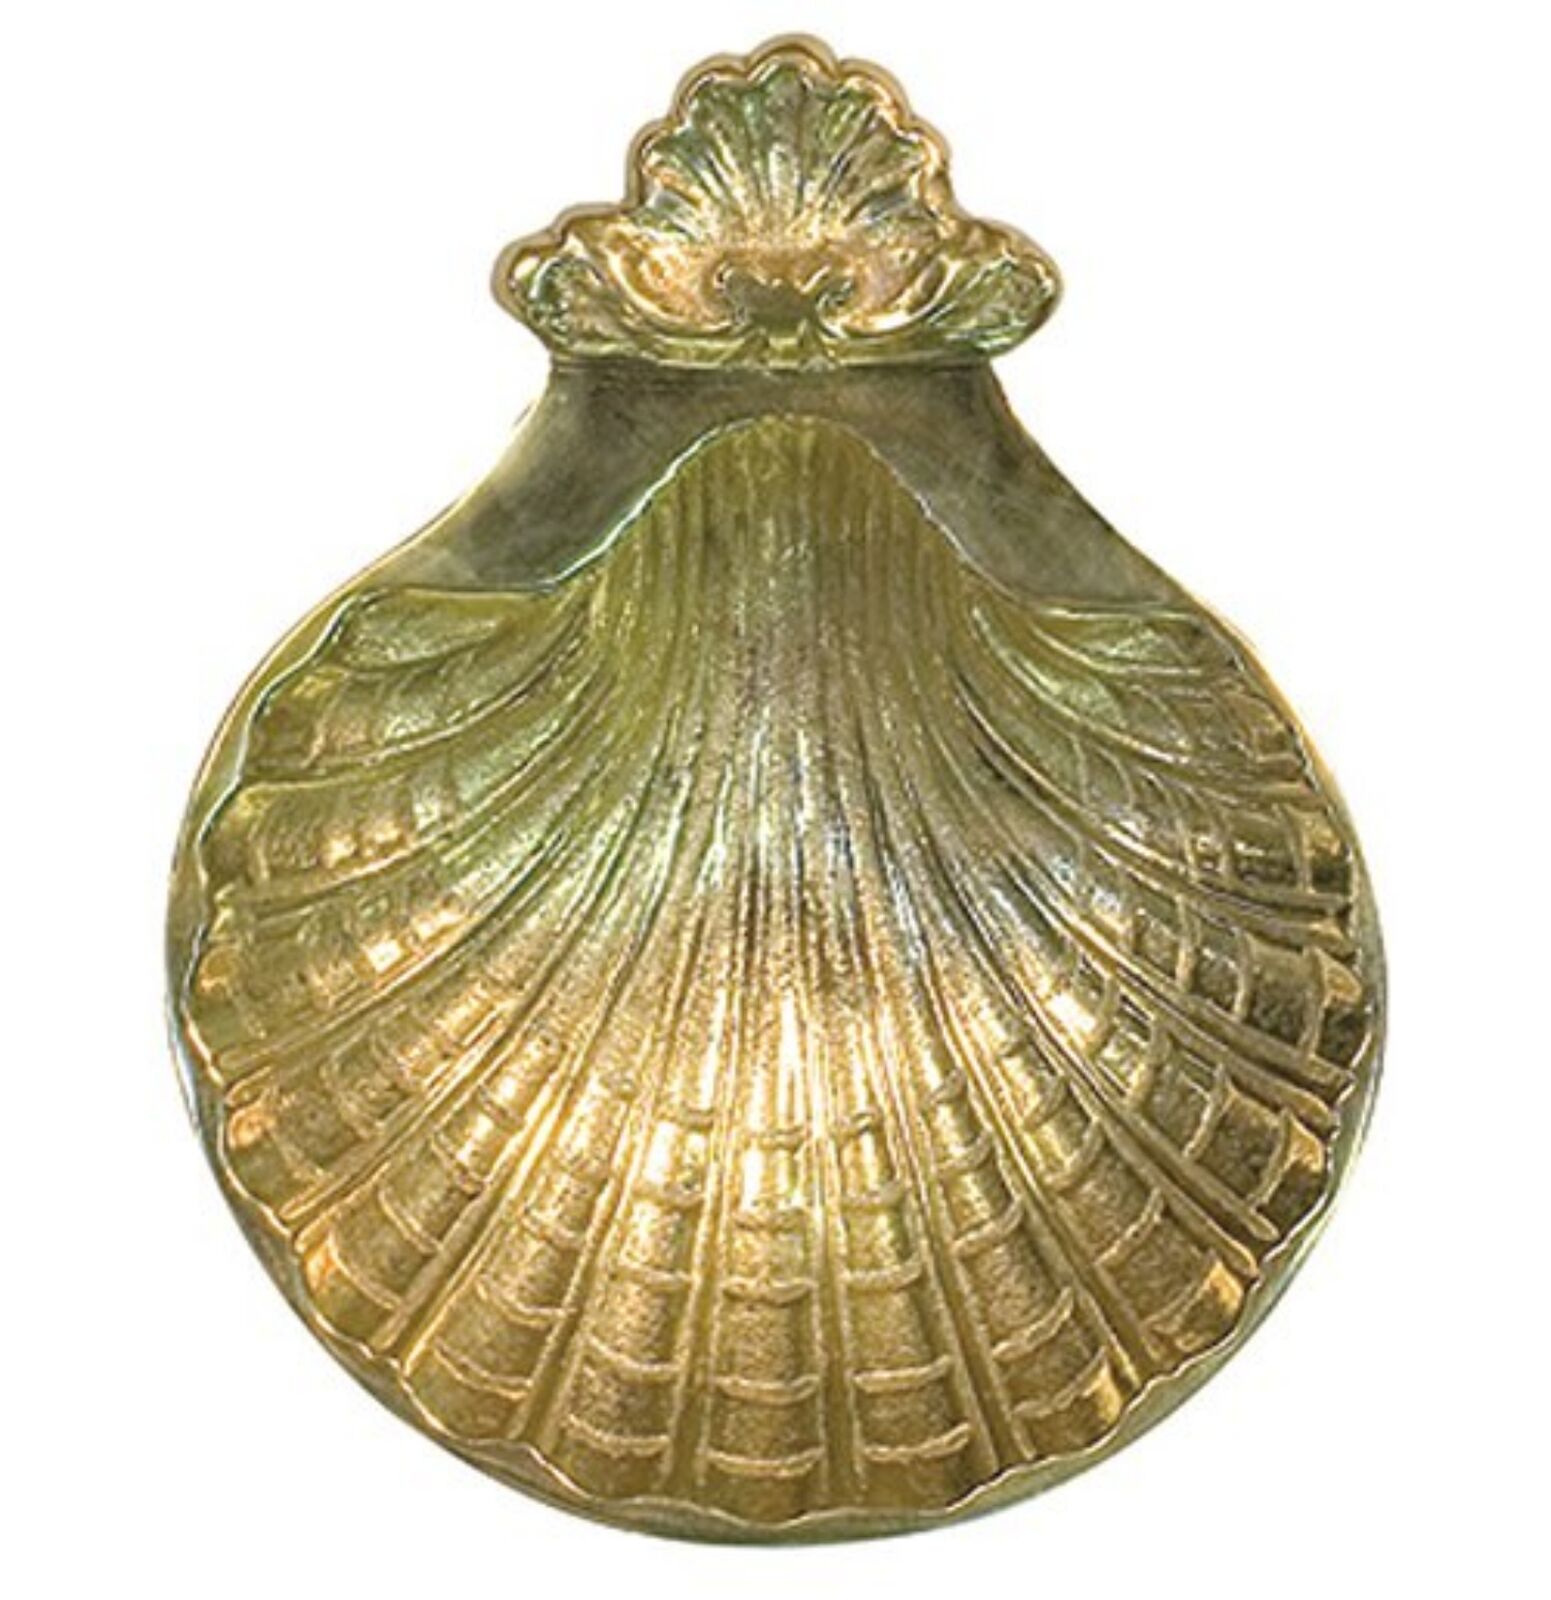 N.G. Solid Brass Baptism Shell for Church Supplies, 5 Inch